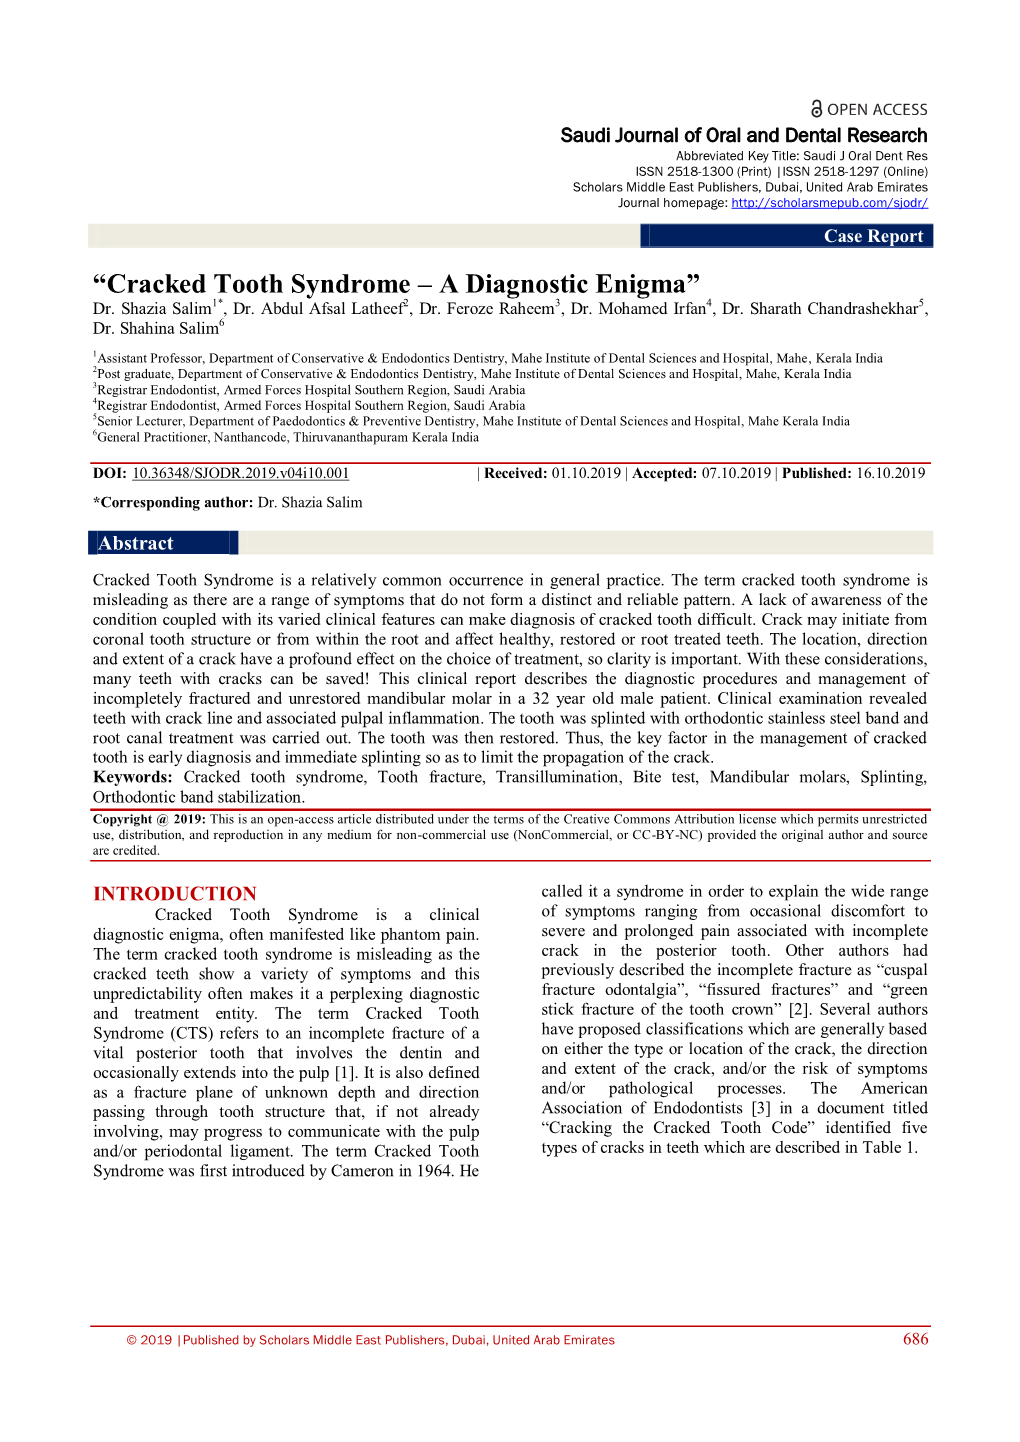 “Cracked Tooth Syndrome – a Diagnostic Enigma” Dr